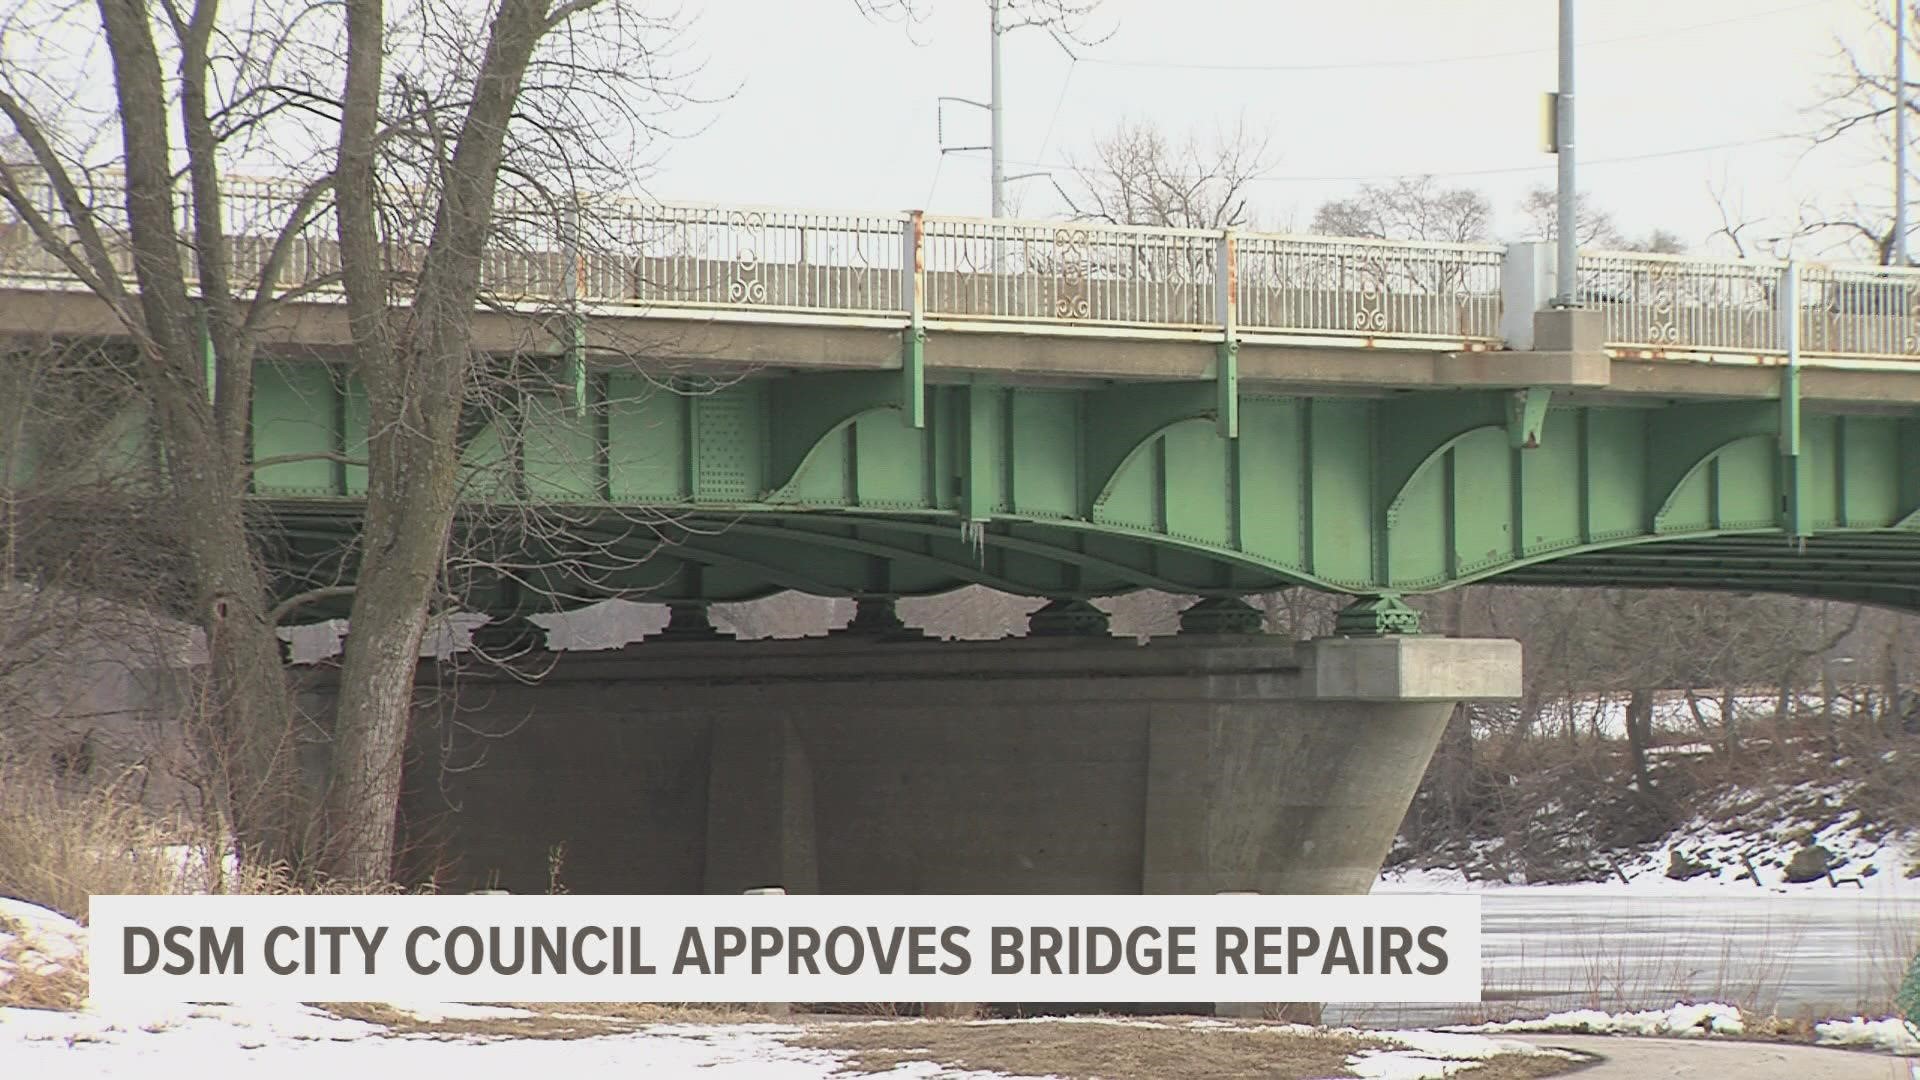 When those repairs are complete, there will be three remaining structurally deficient bridges in the city. The city has plans to improve those over the next 5 years.